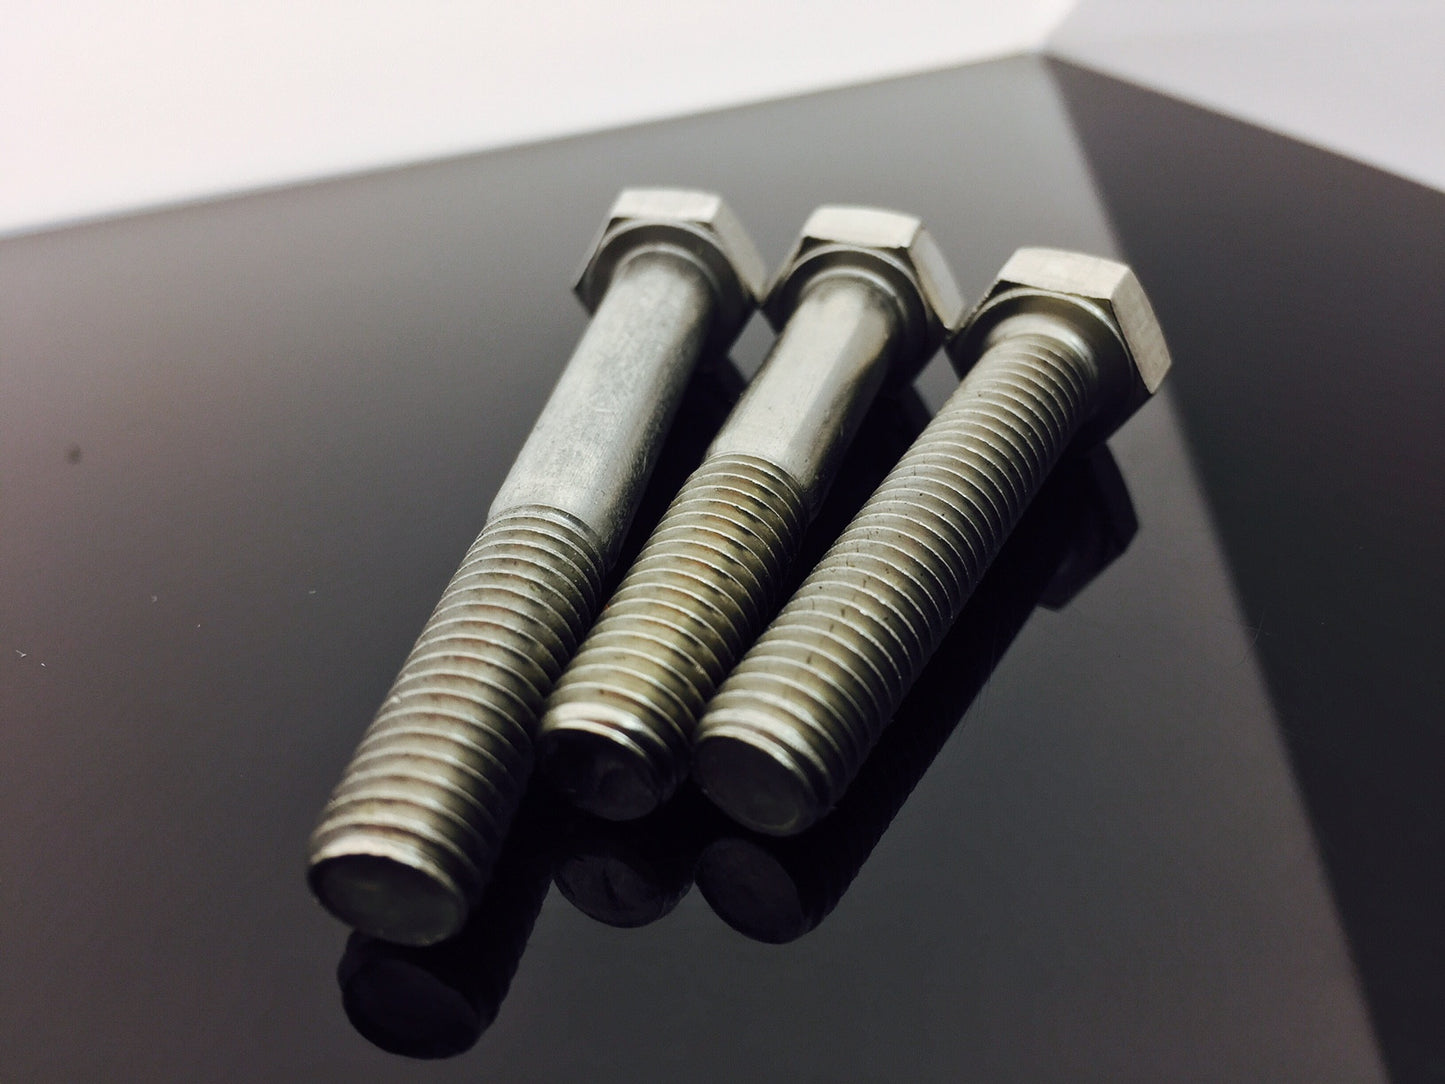 UNF, 3/8", Hex Bolt/ Hex Set Screw, A2/ 304 Stainless Steel, DIN 931. Hex-Bolt UNF, 3/8", Hex Bolt/ Hex Set Screw, A2/ 304 Stainless Steel, DIN 931. UNF, Hex-Bolt